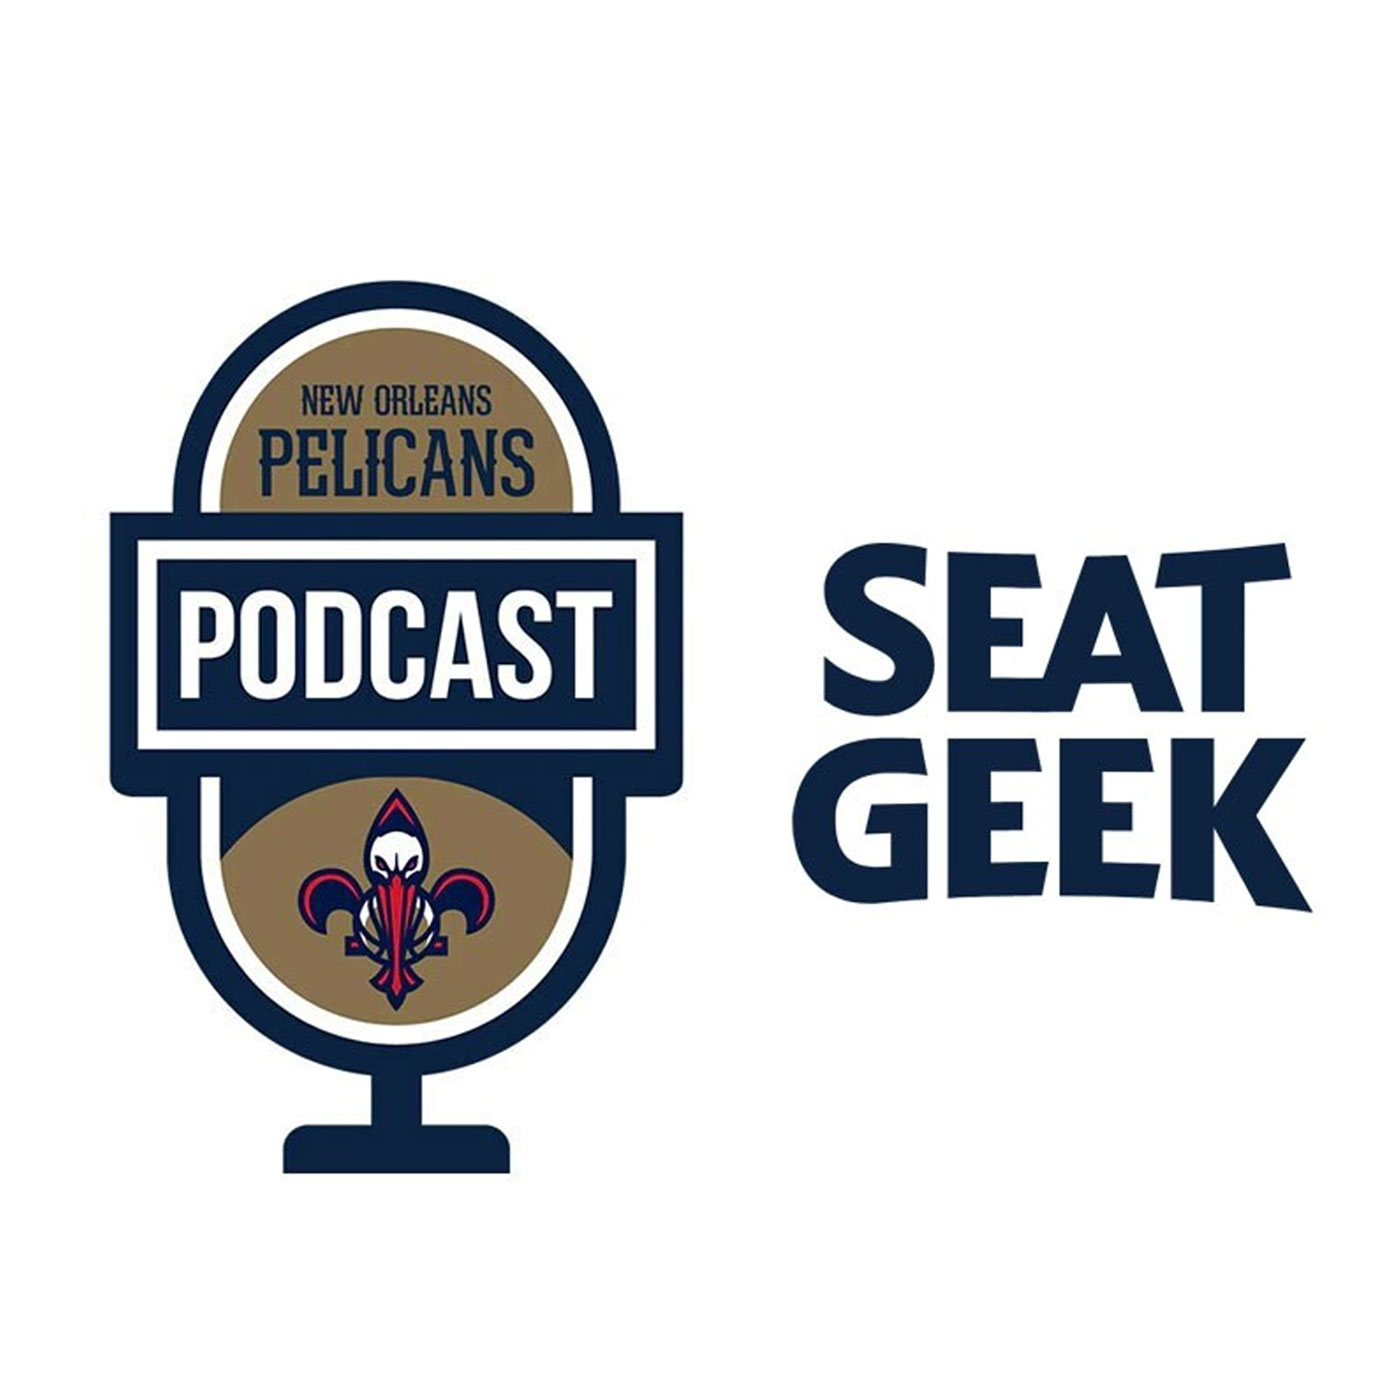 John DeShazier on the New Orleans Pelicans Podcast presented by SeatGeek - April 20, 2022